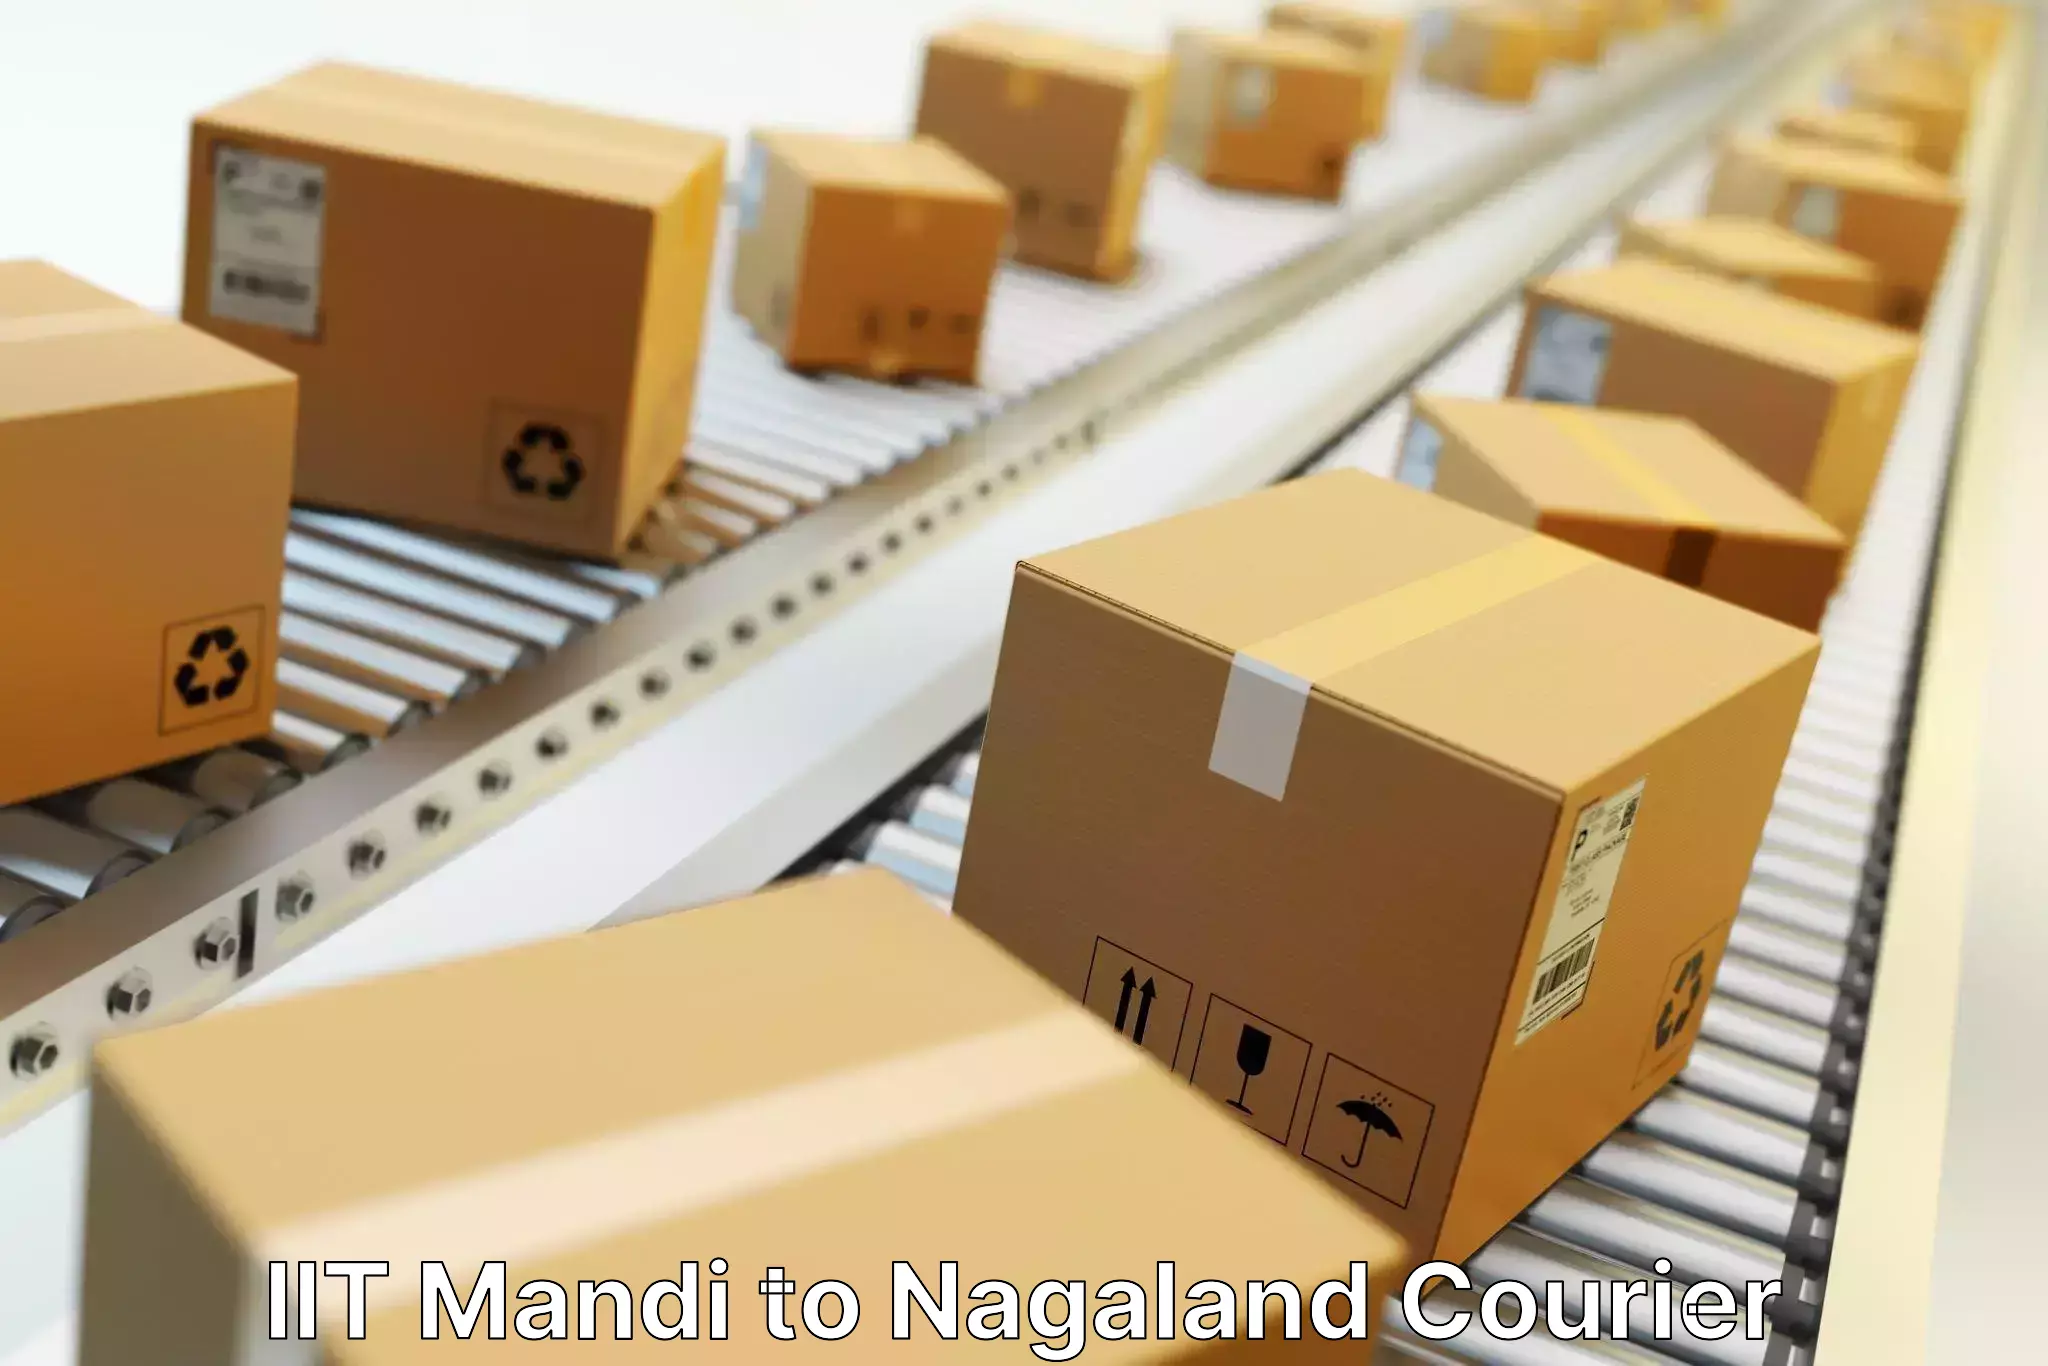 State-of-the-art courier technology IIT Mandi to Mon